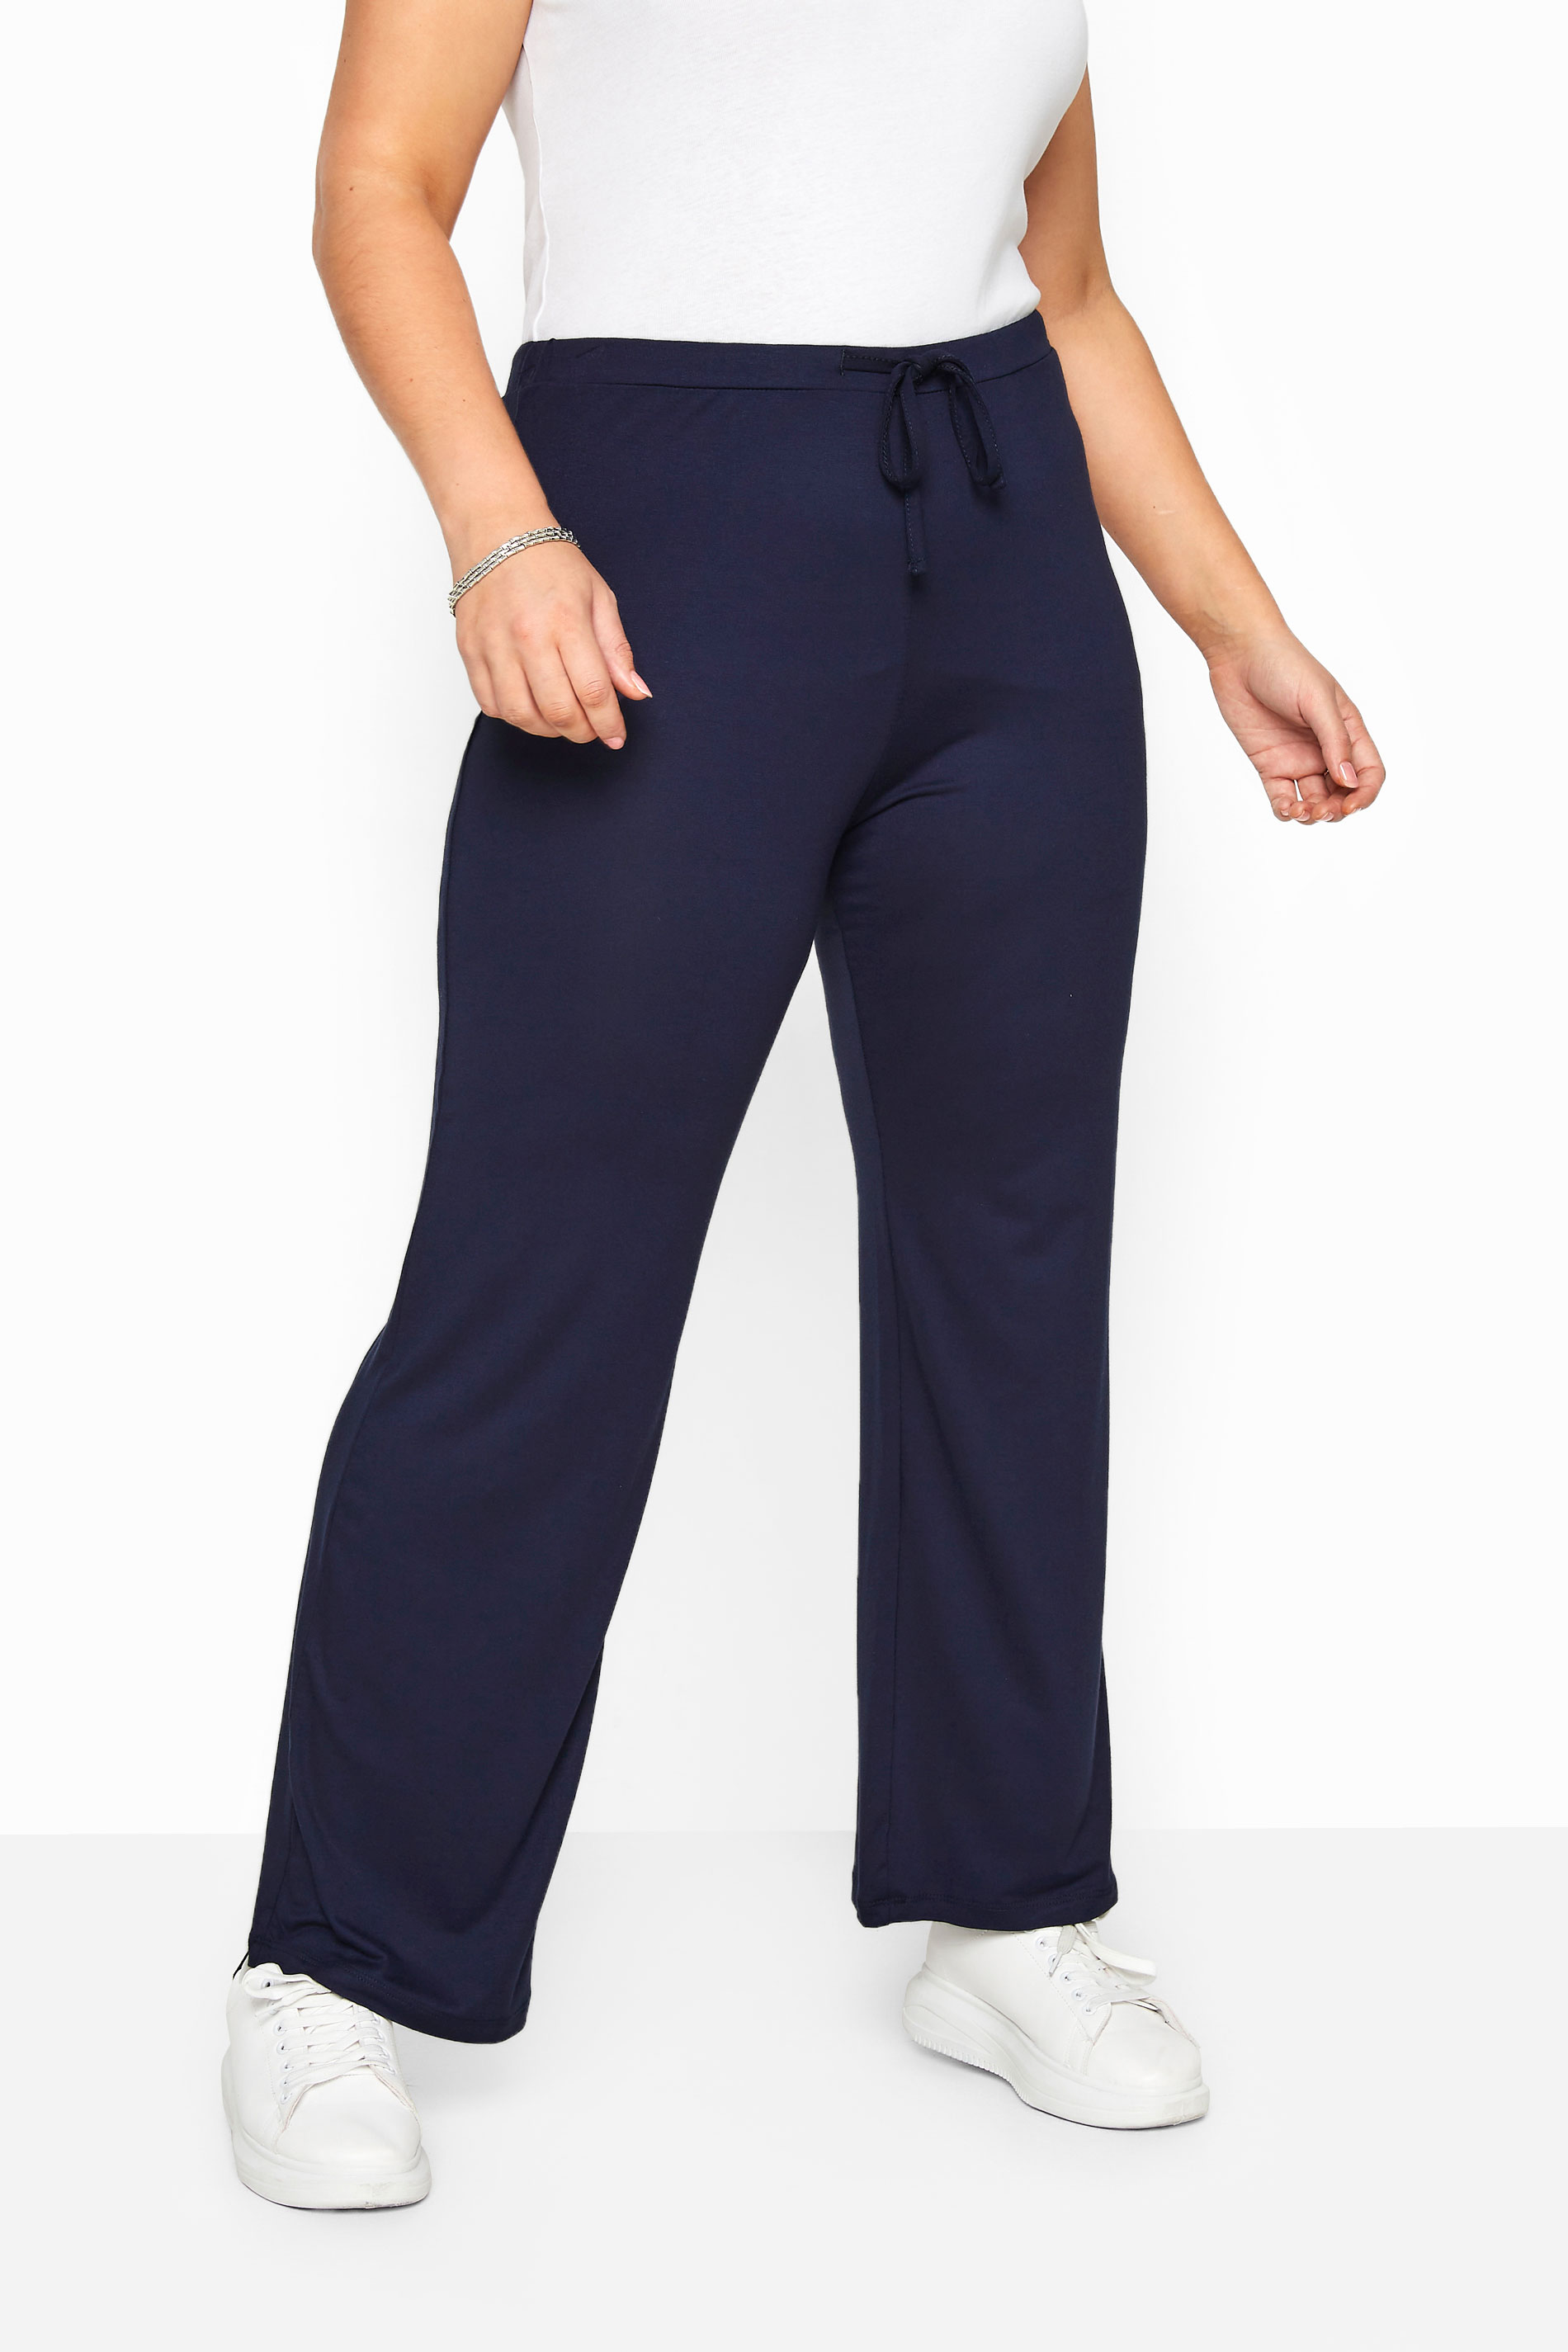 BESTSELLER Curve Navy Blue Wide Leg Pull On Stretch Jersey Yoga Pants 1